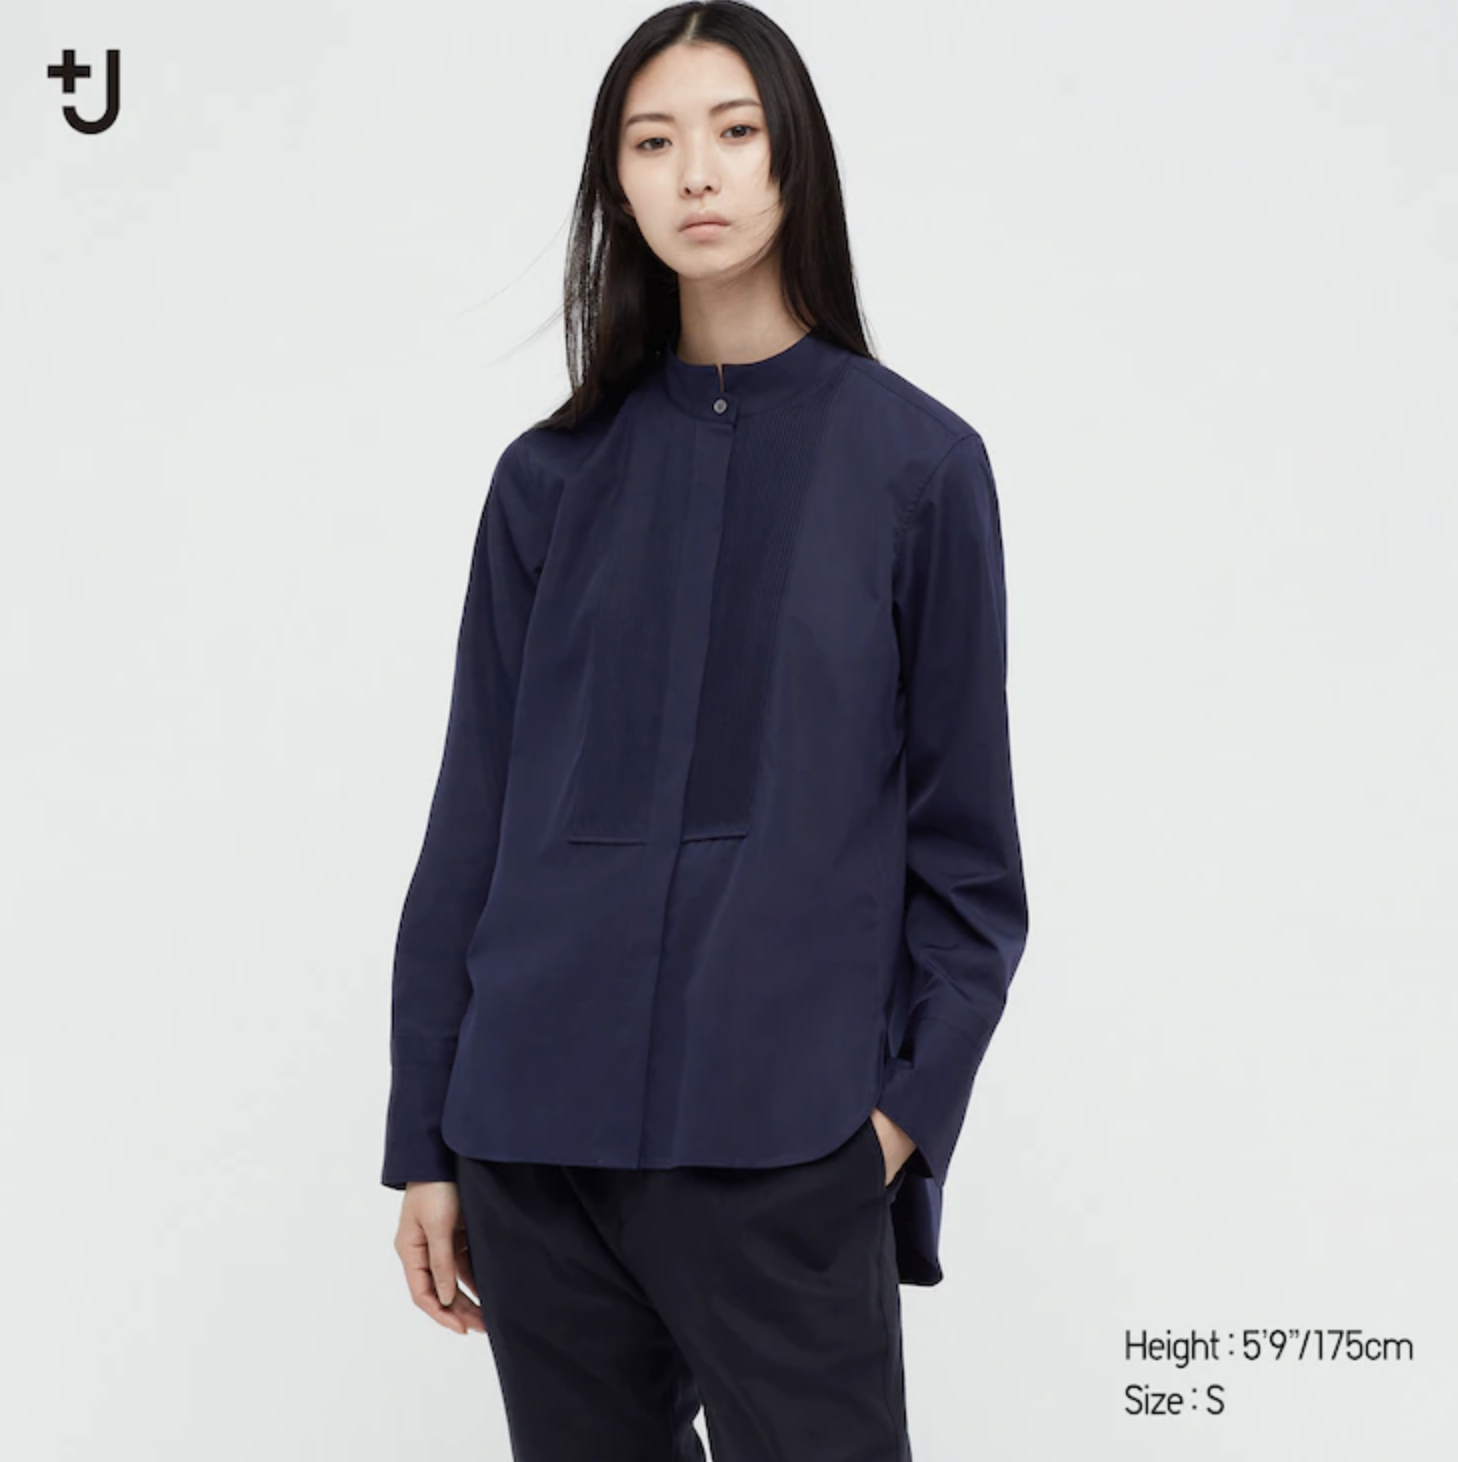 Uniqlo's Affordable Fashion Collaborations with High-End Designers +J ...